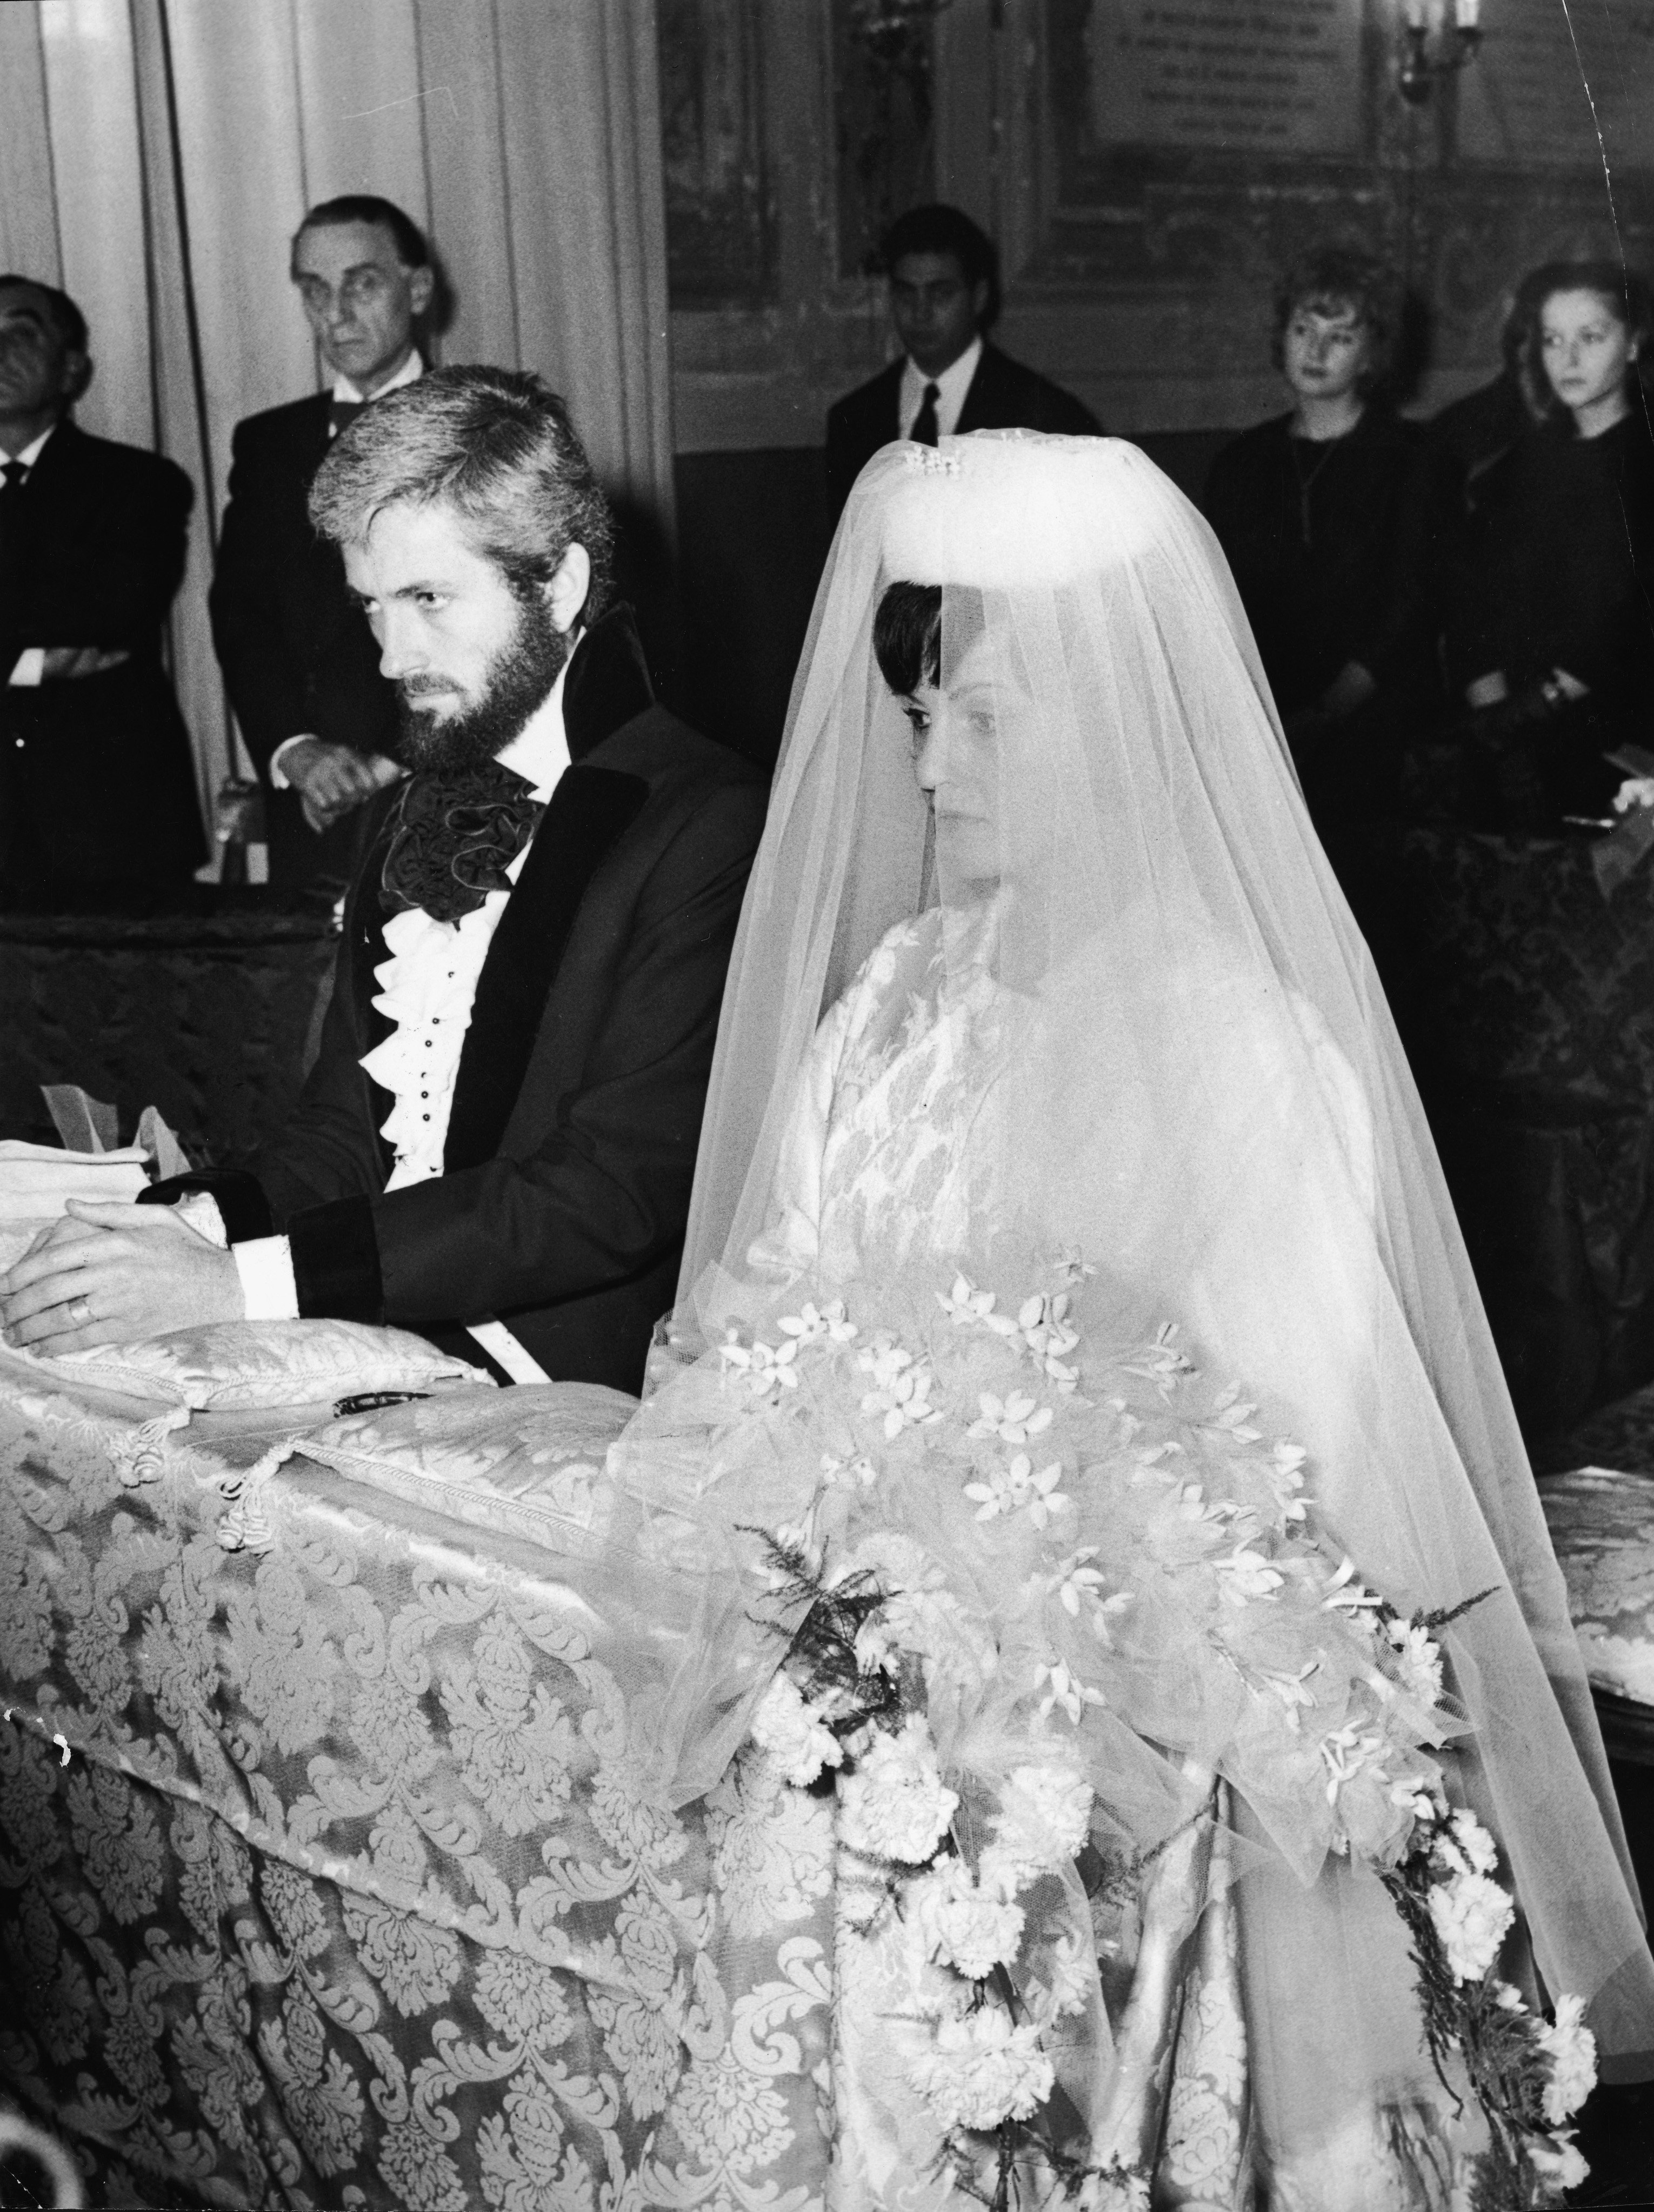 John Drew Barrymore and Gabriella Palazzoli at their wedding ceremony in 1960 | Source: Getty Images